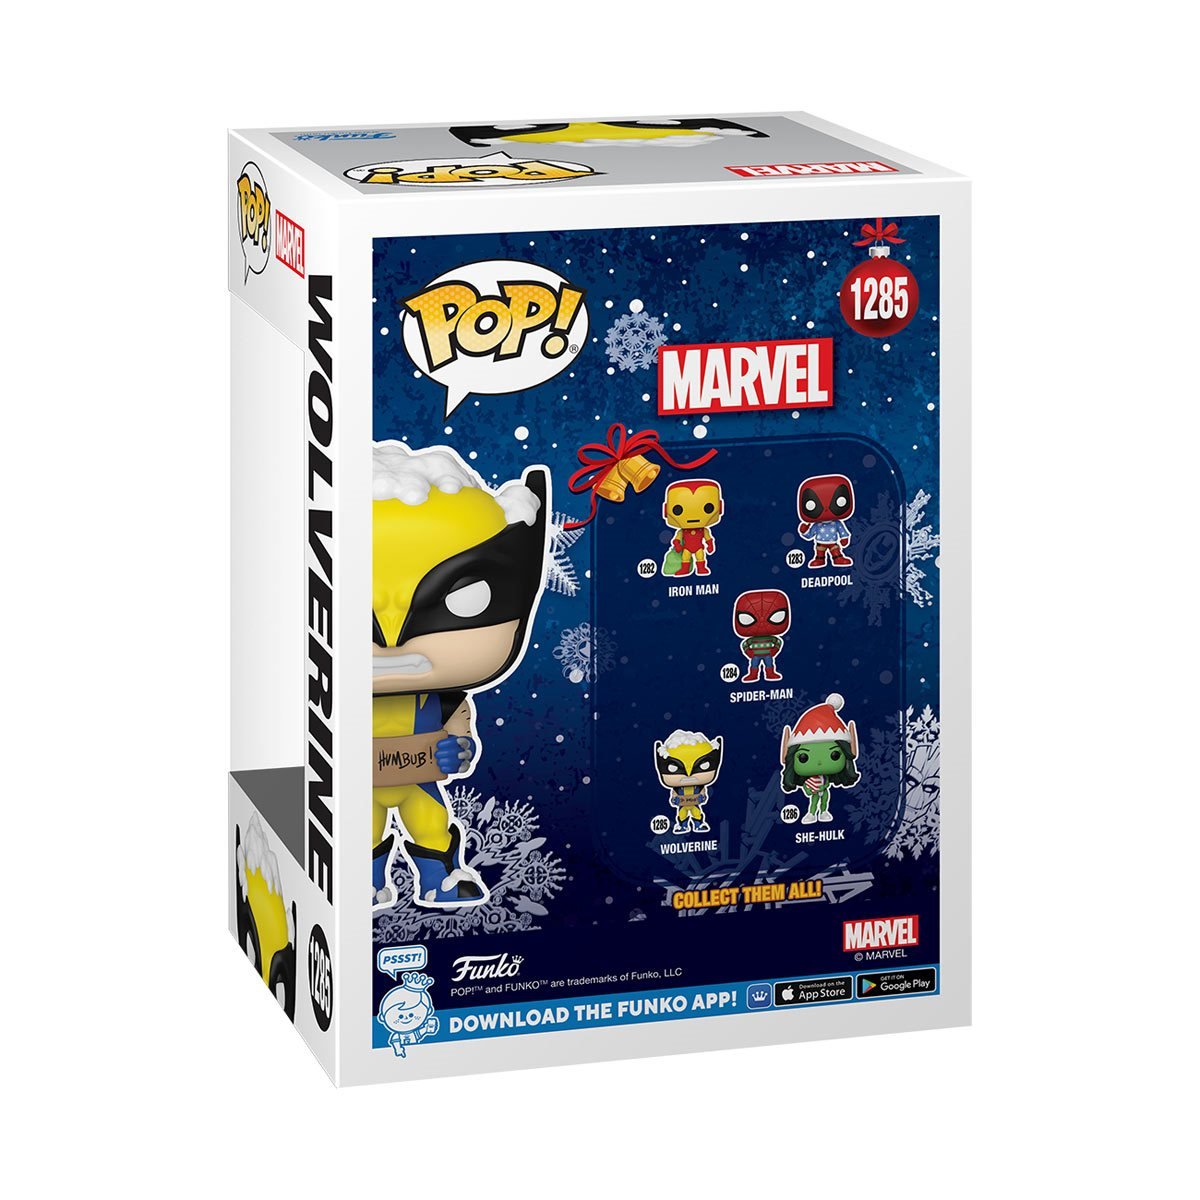 Marvel Apparel, More! Gifts, and - Shop